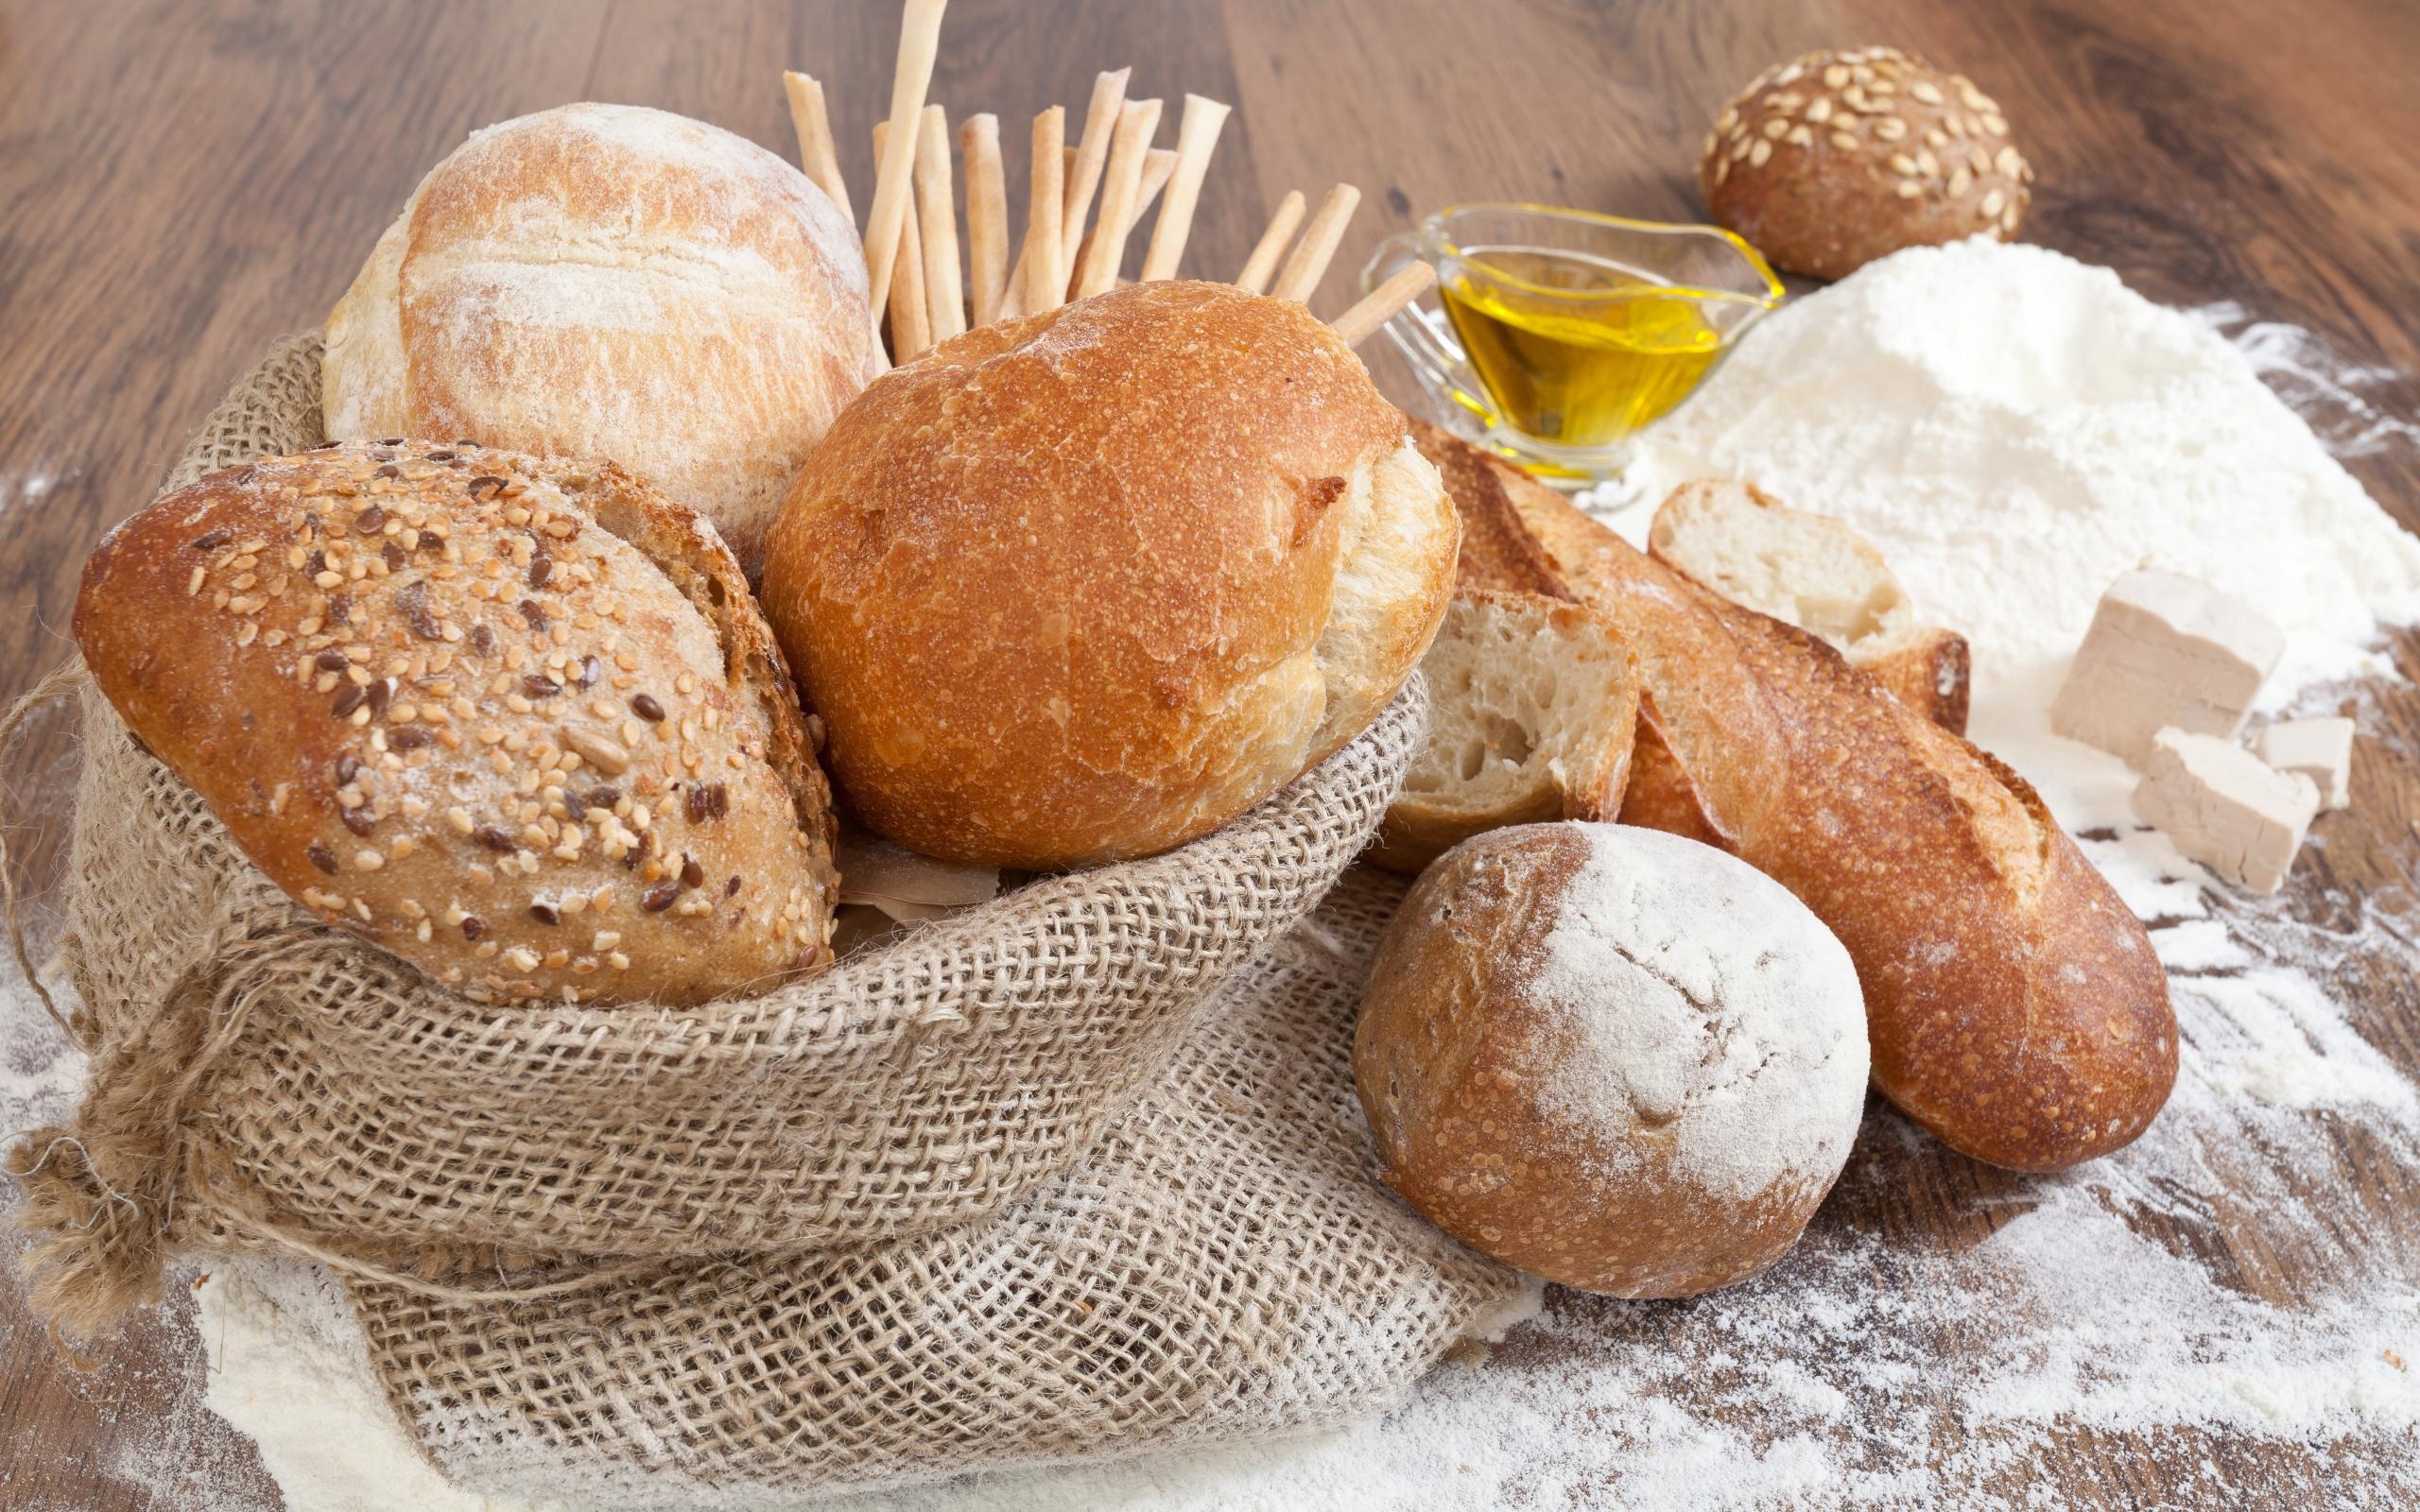 Gourmet bread photography, Savory collection, Exquisite flavors, Culinary delight, 2560x1600 HD Desktop